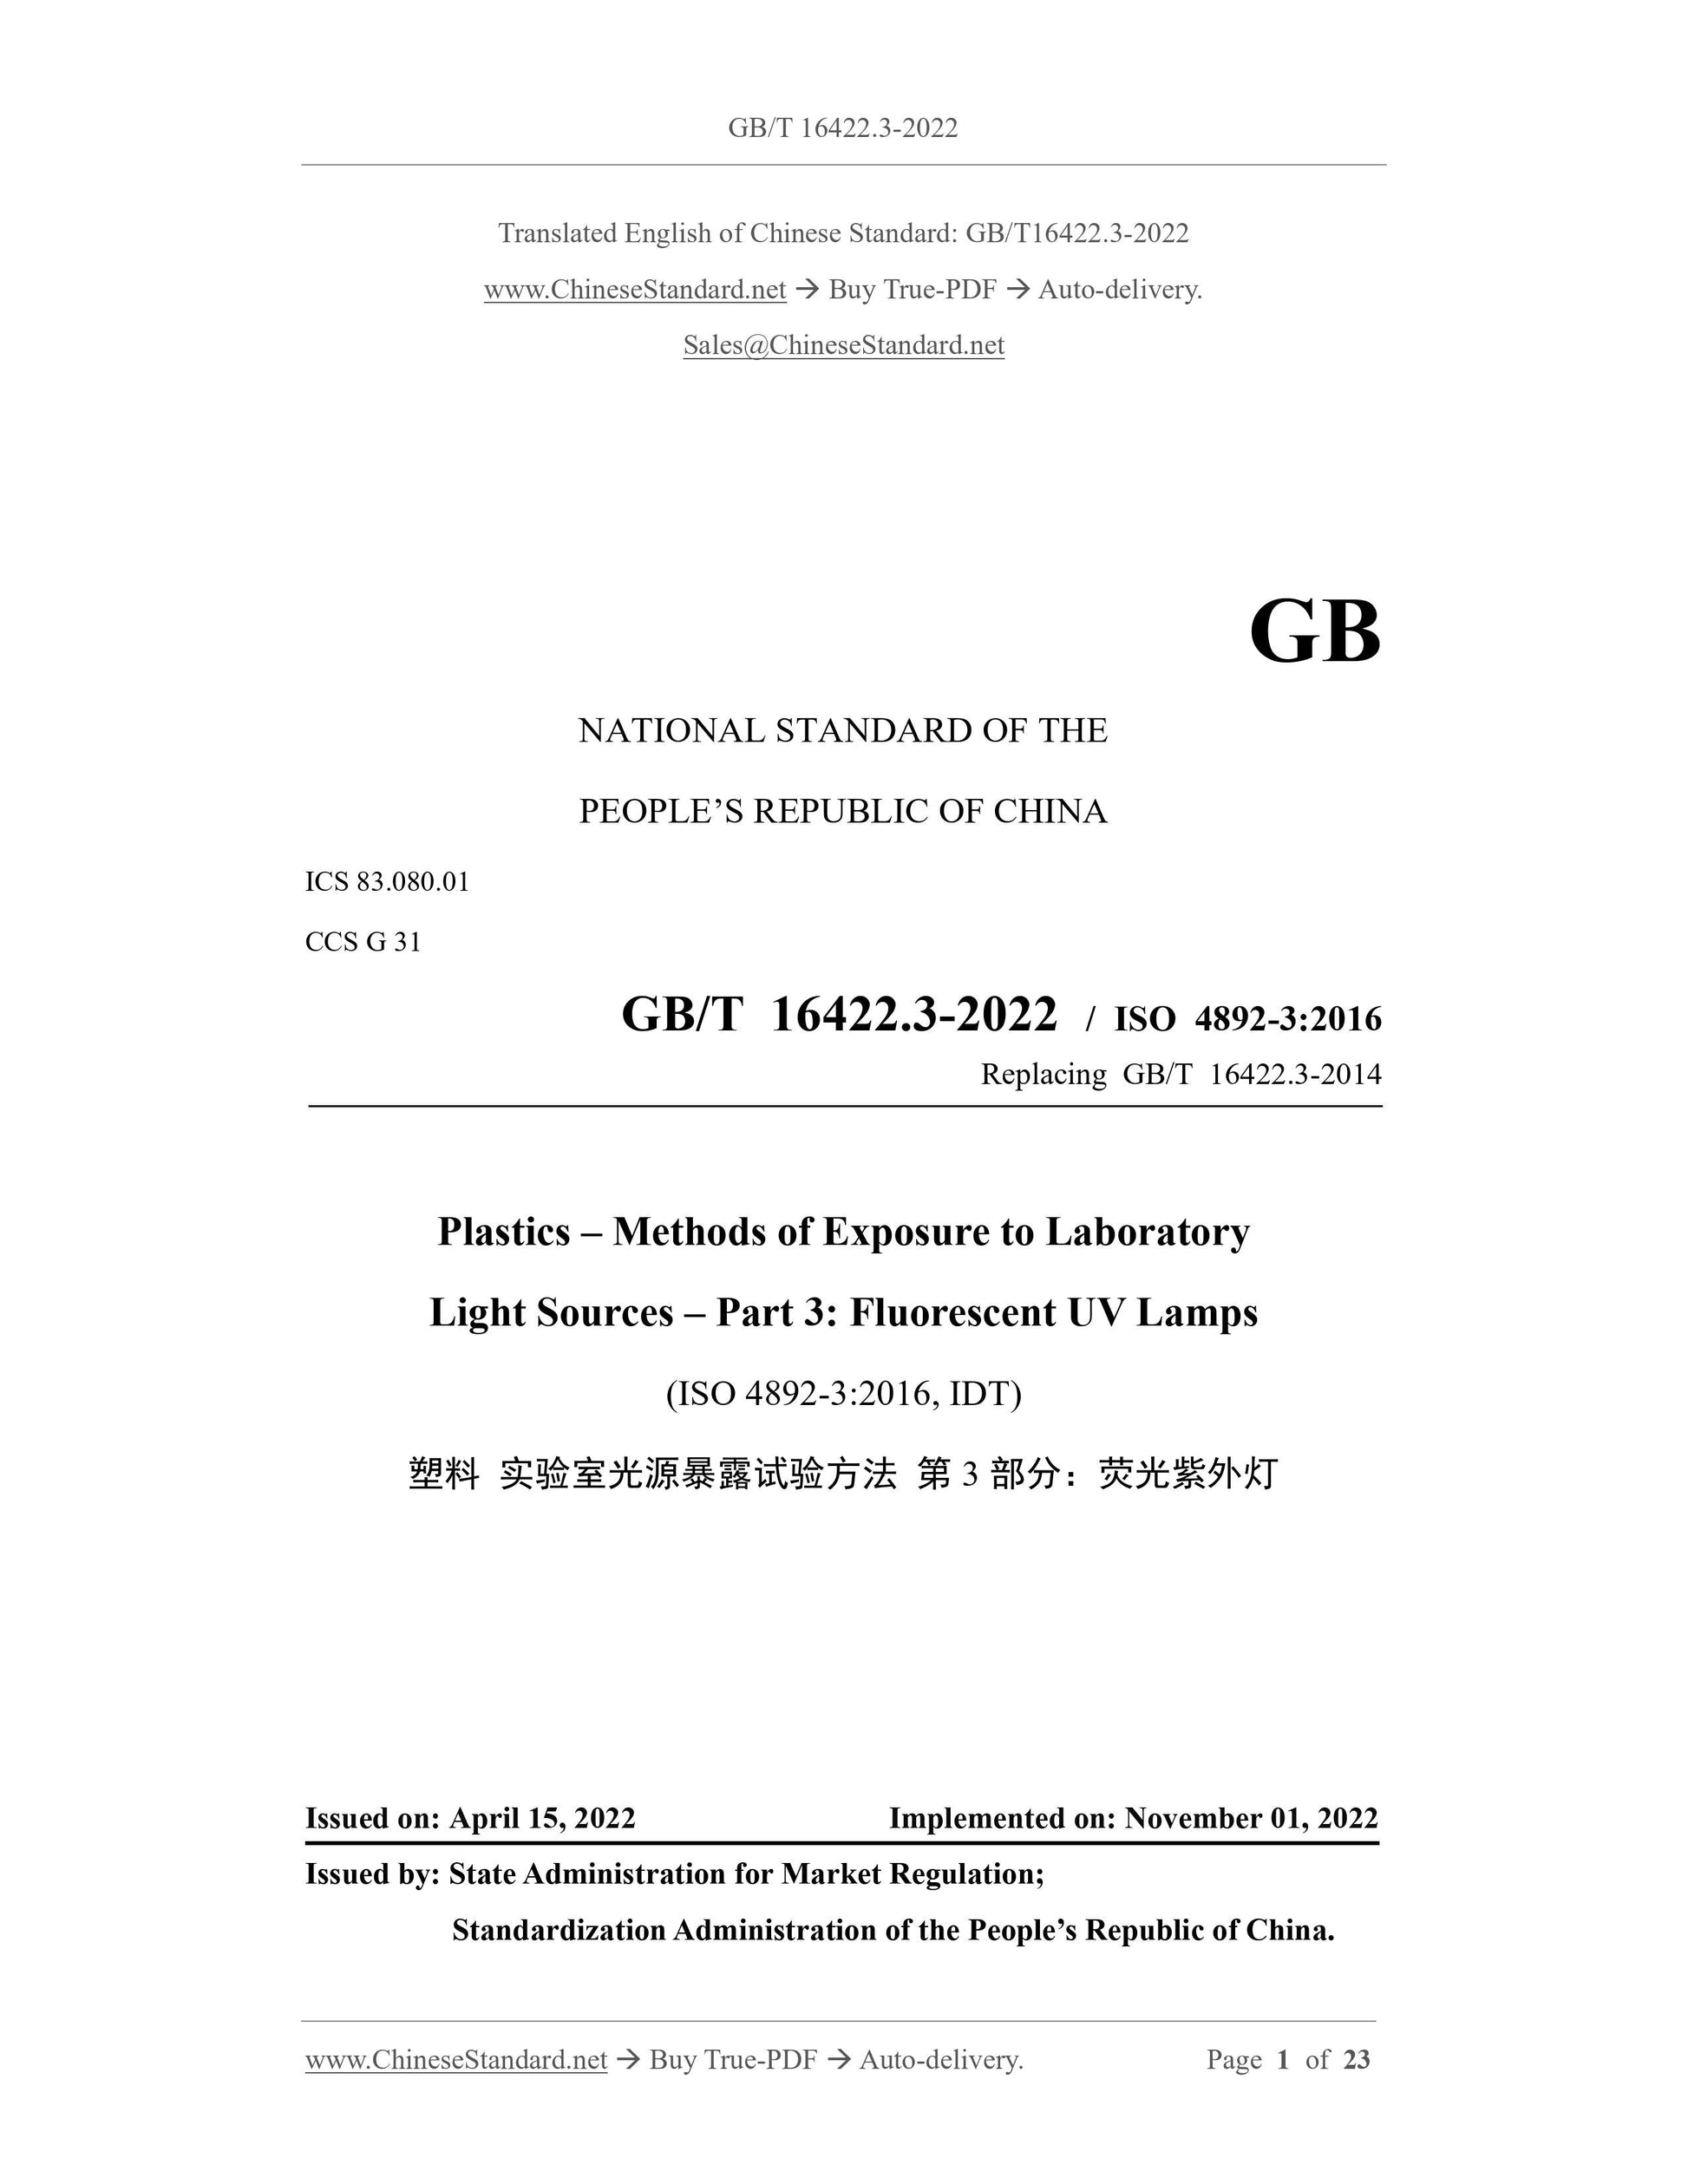 GB/T 16422.3-2022 Page 1